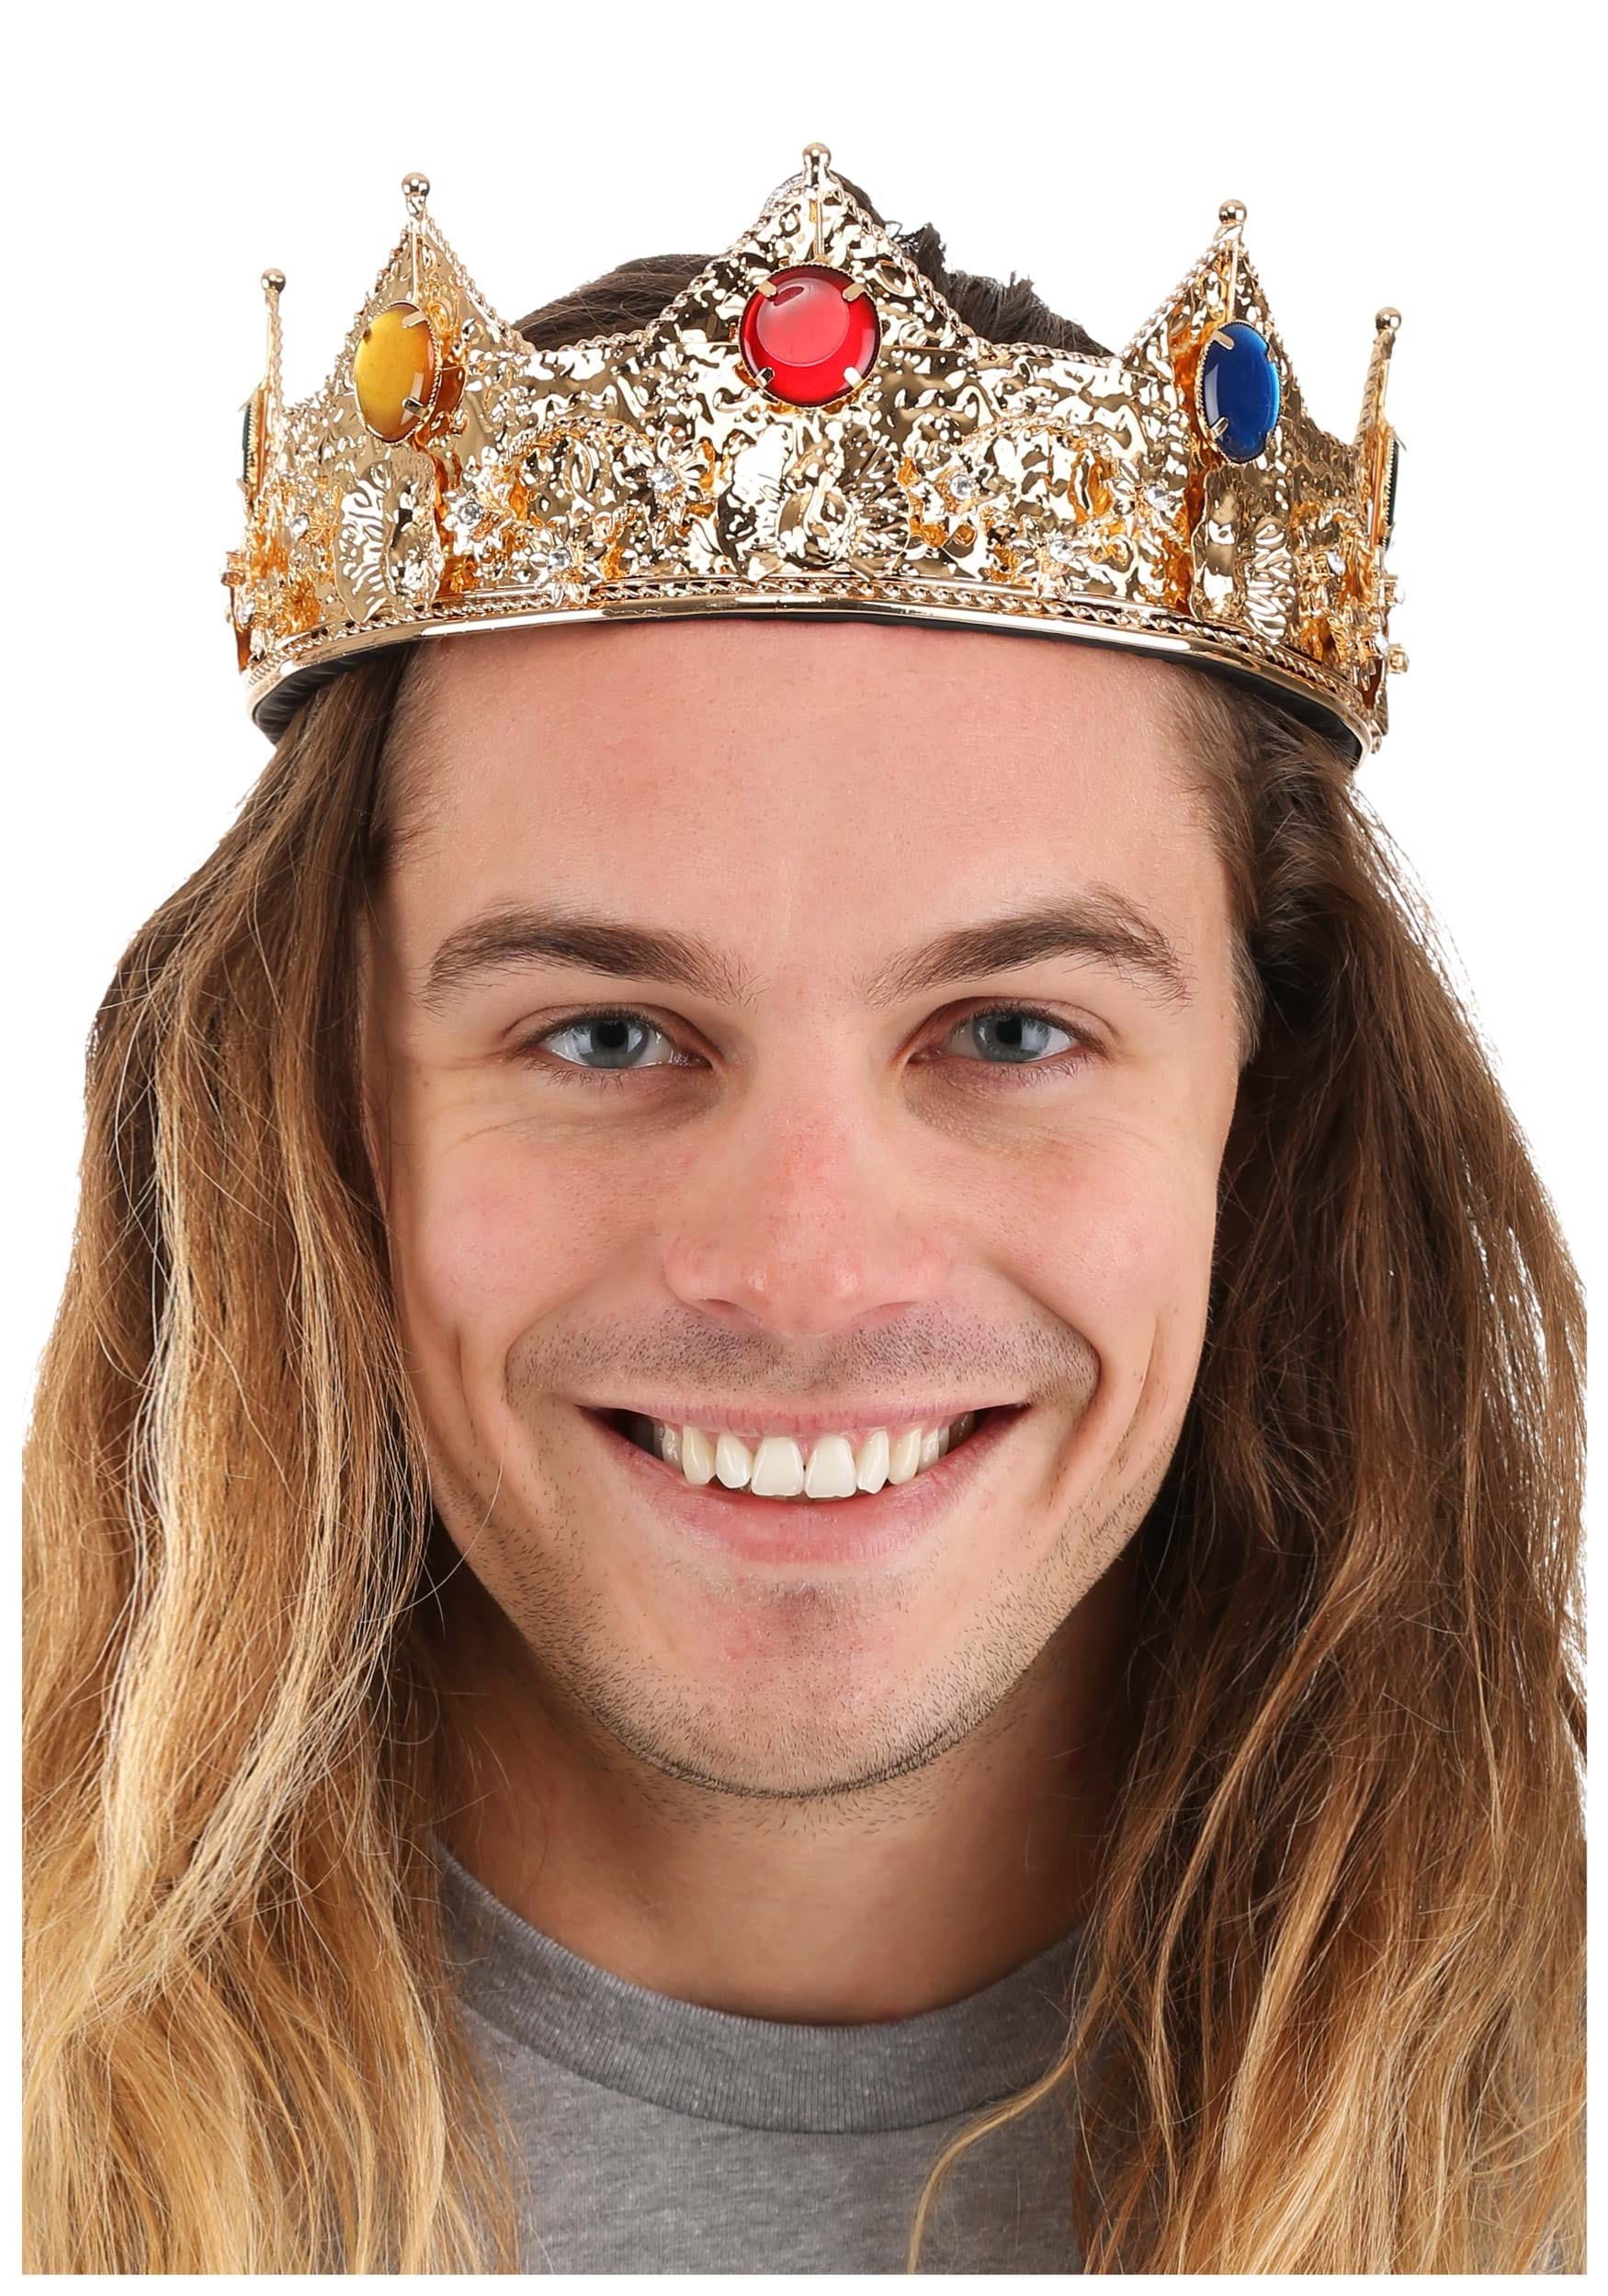 King Crowns for Kids Fun Central AY970 Regal Gold King Crown King Crown Toy Costume